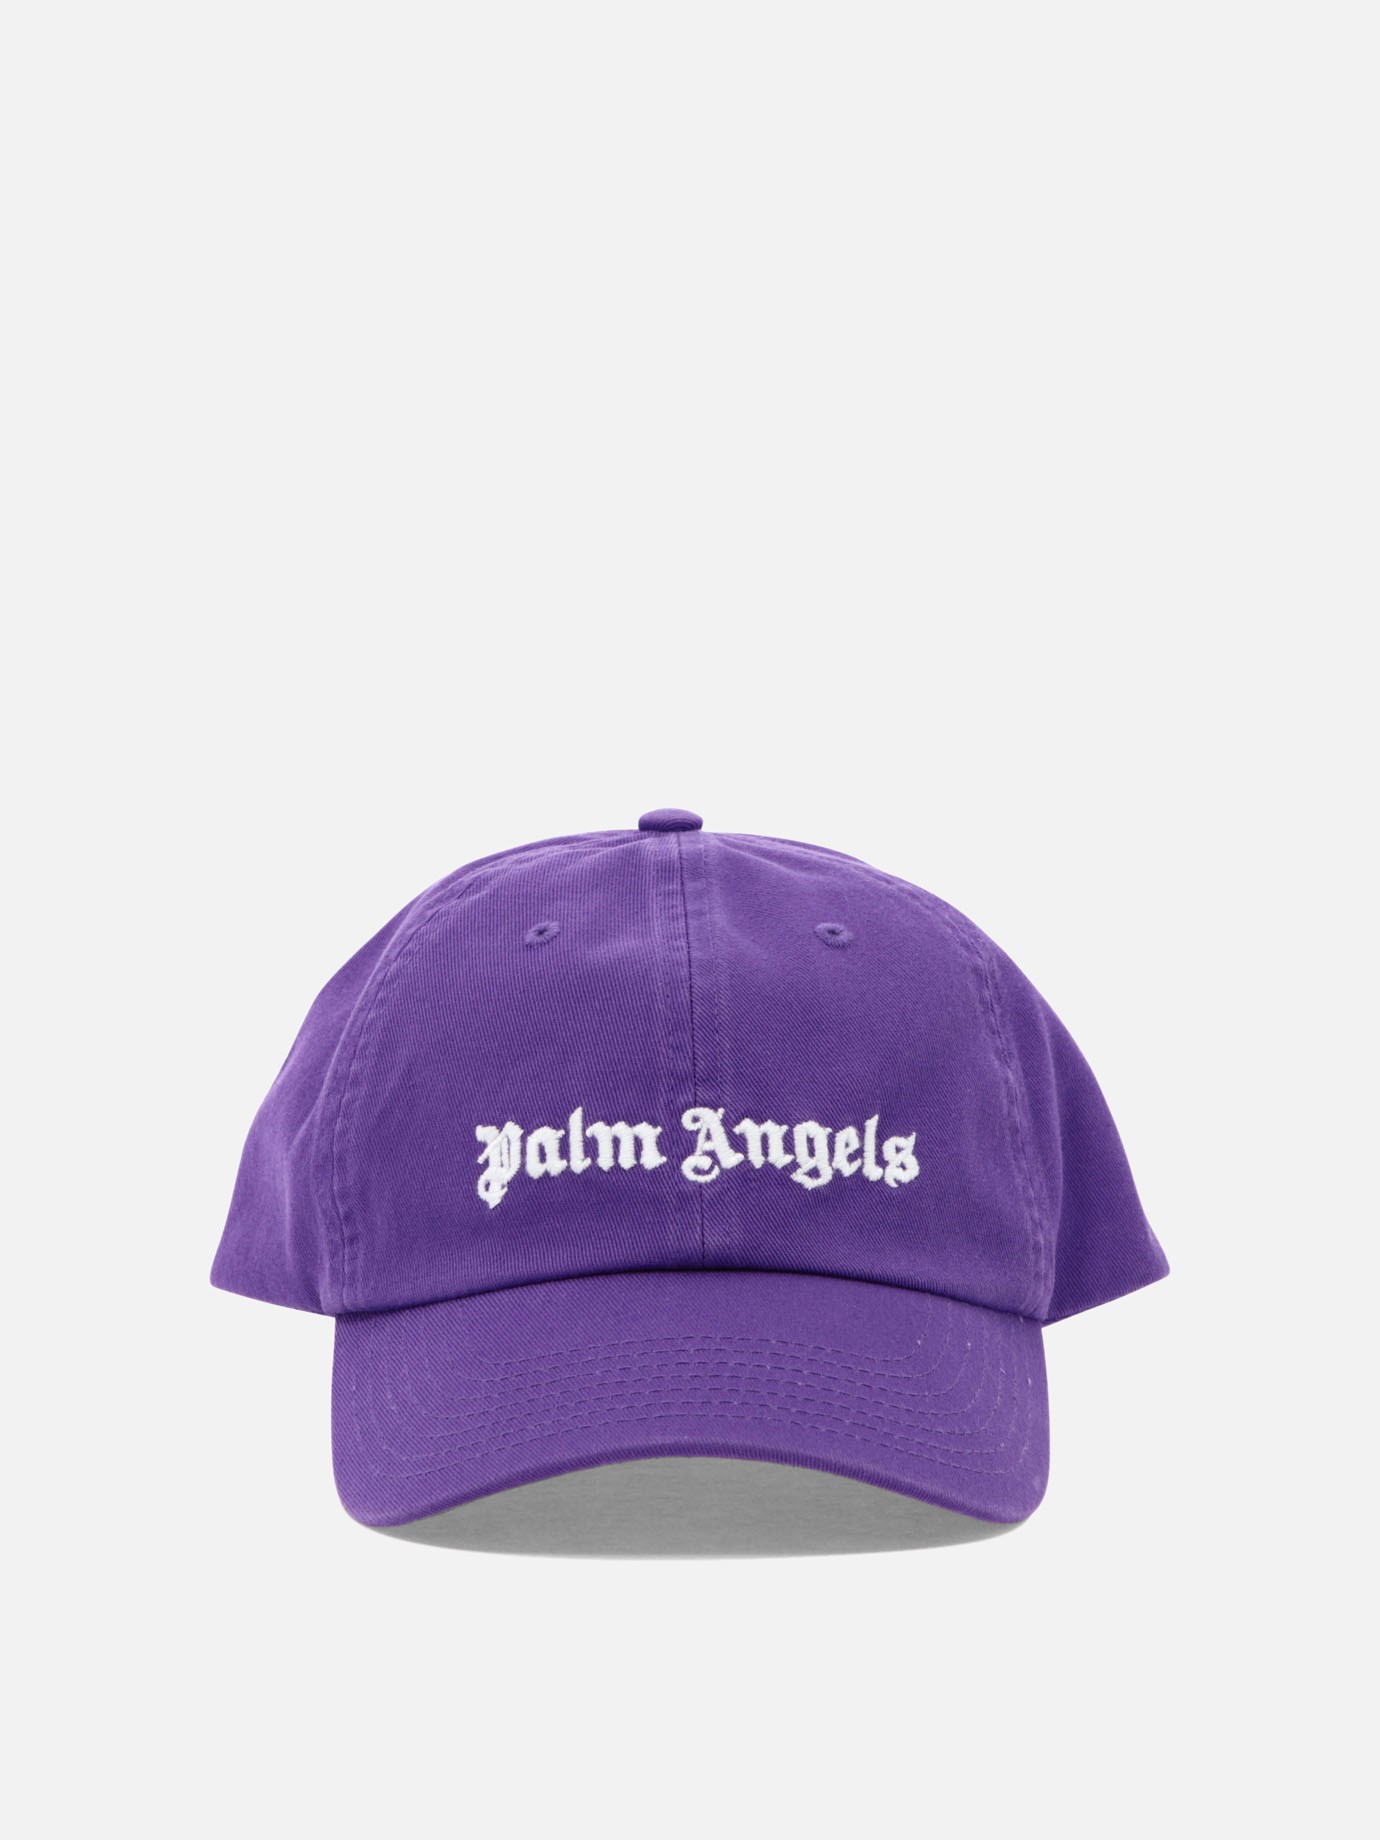 Cappellino  Classic Logo by Palm Angels - 2